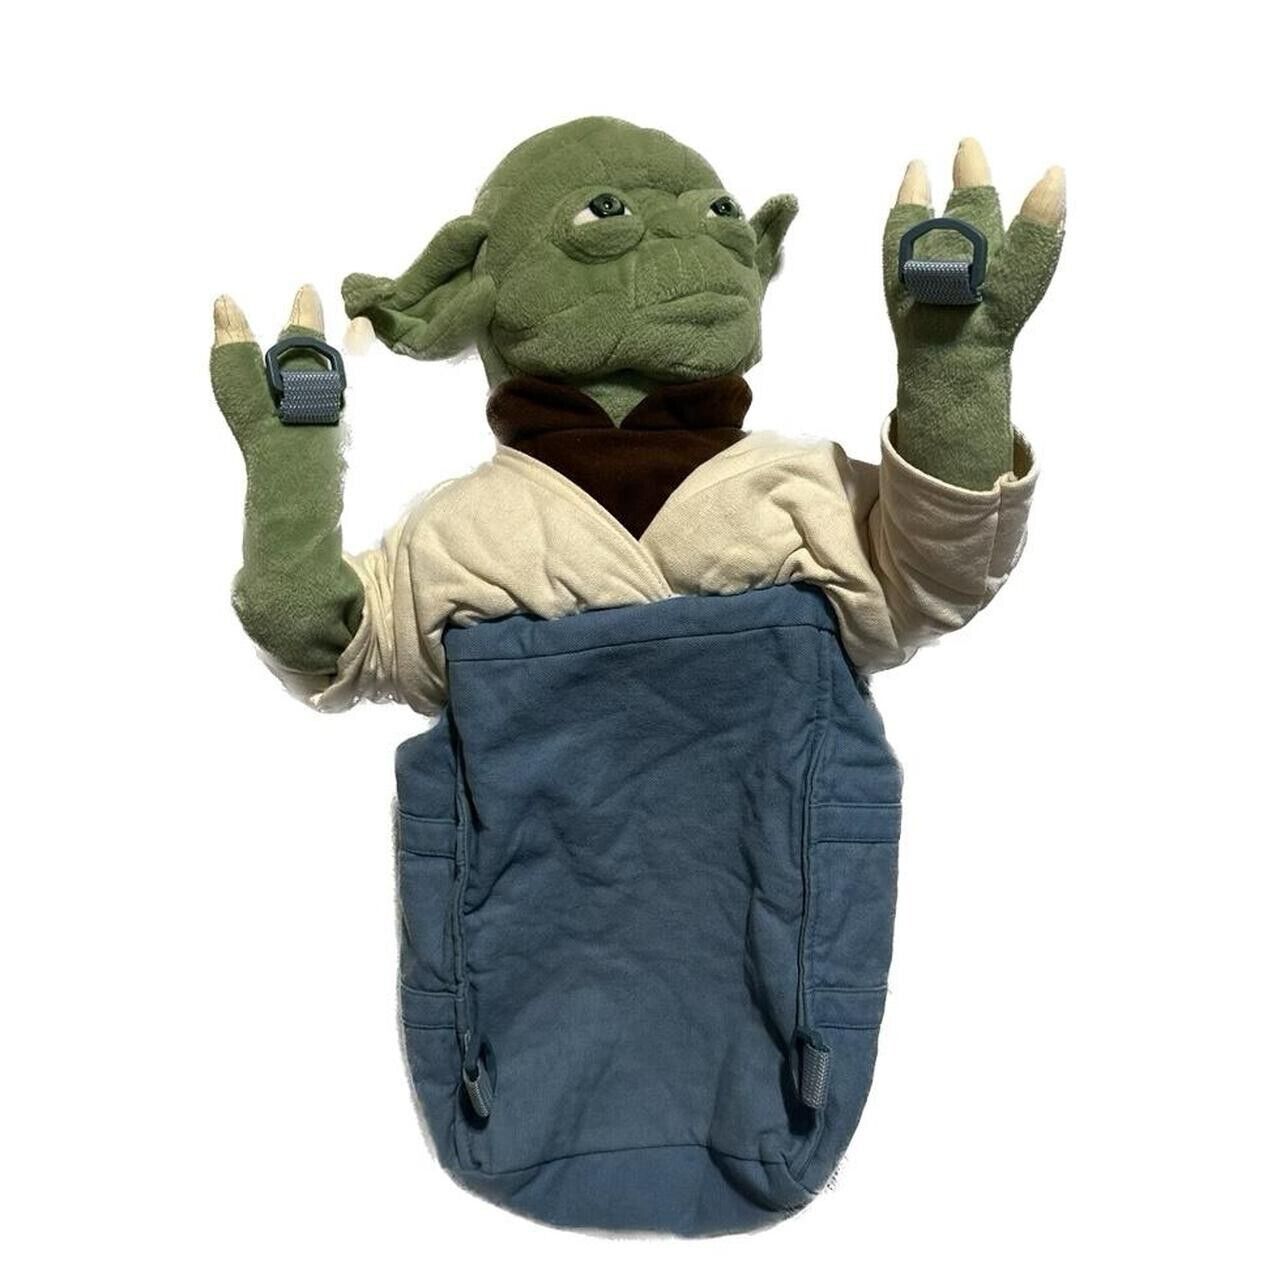 Extremely rare authentic 1990s vintage Yoda from Star Wars backpack, cannot find